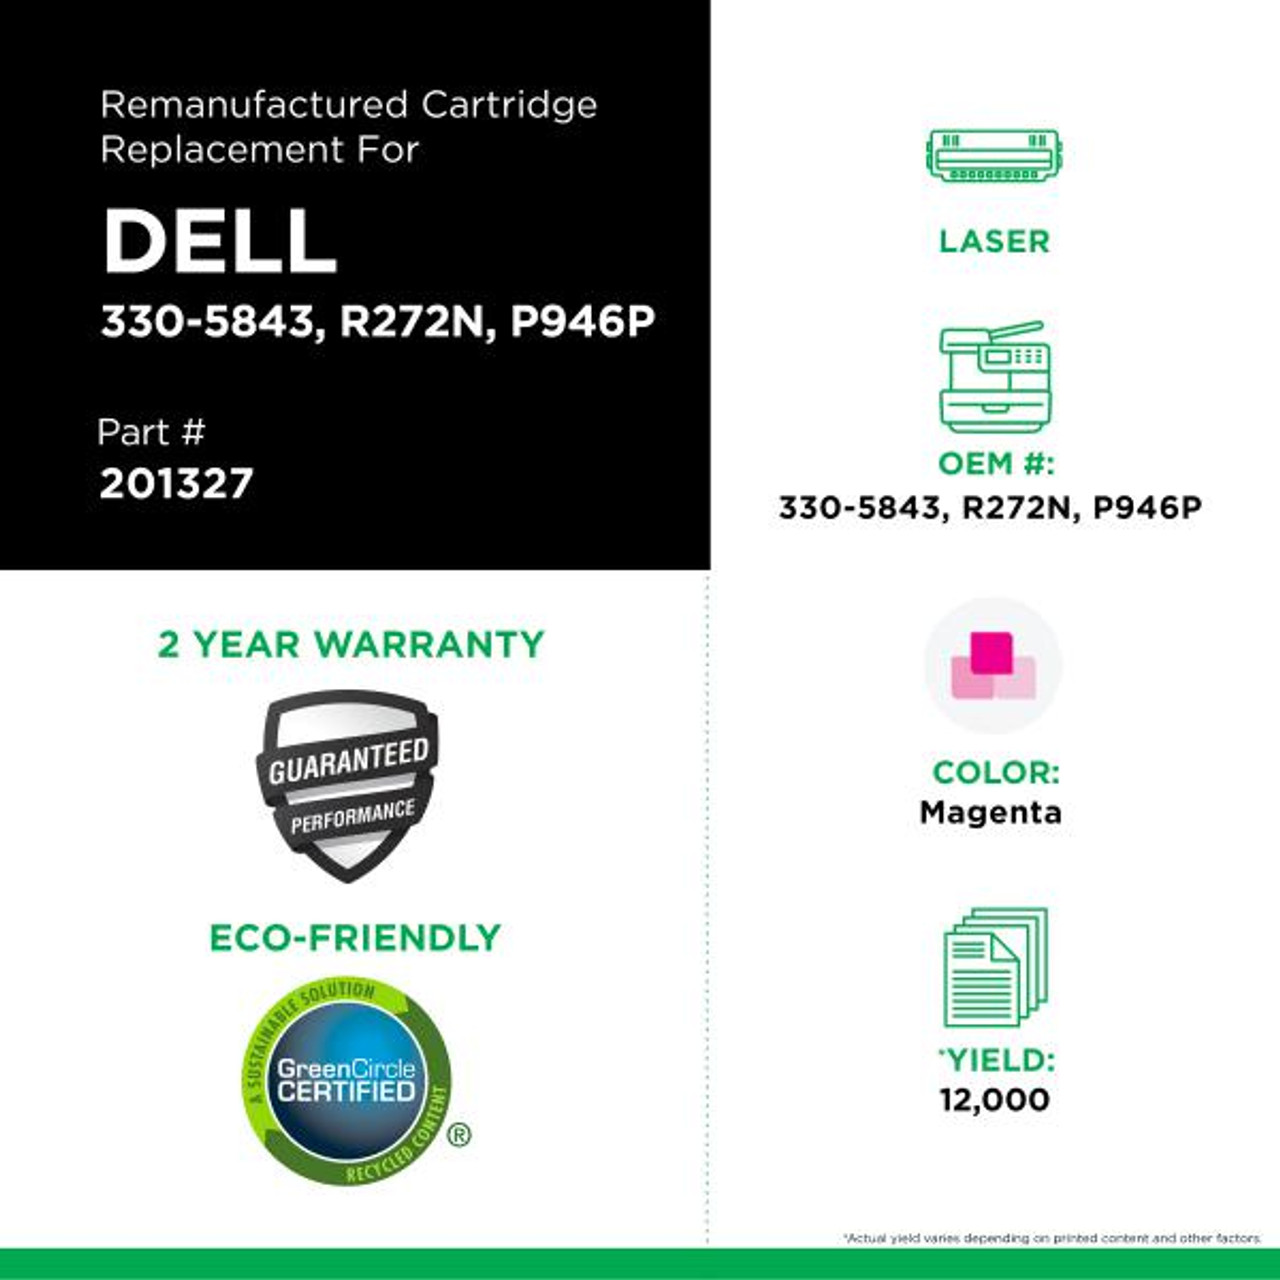 High Yield Magenta Toner Cartridge for Dell 5130-1